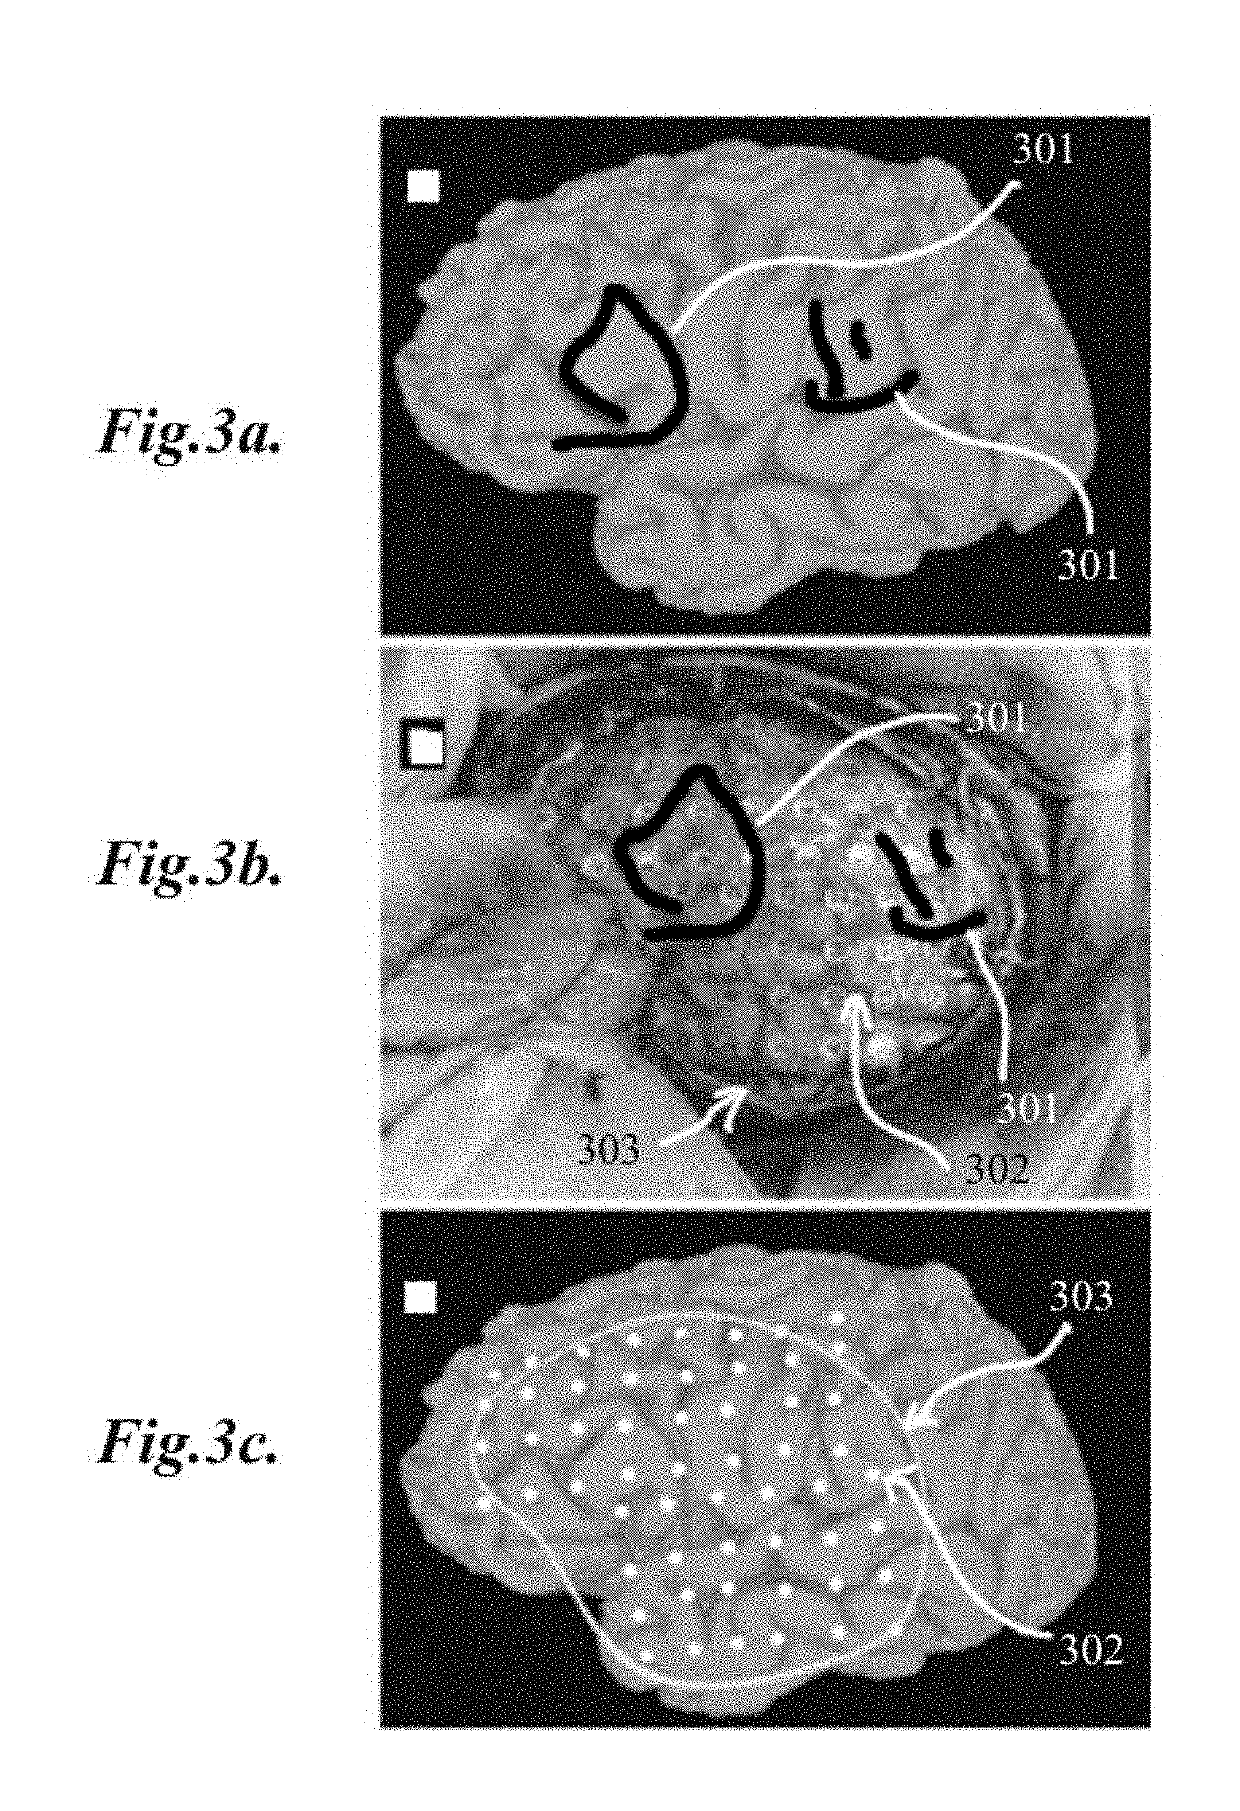 Methods for localization and visualization of electrodes and probes in the brain using anatomical mesh models